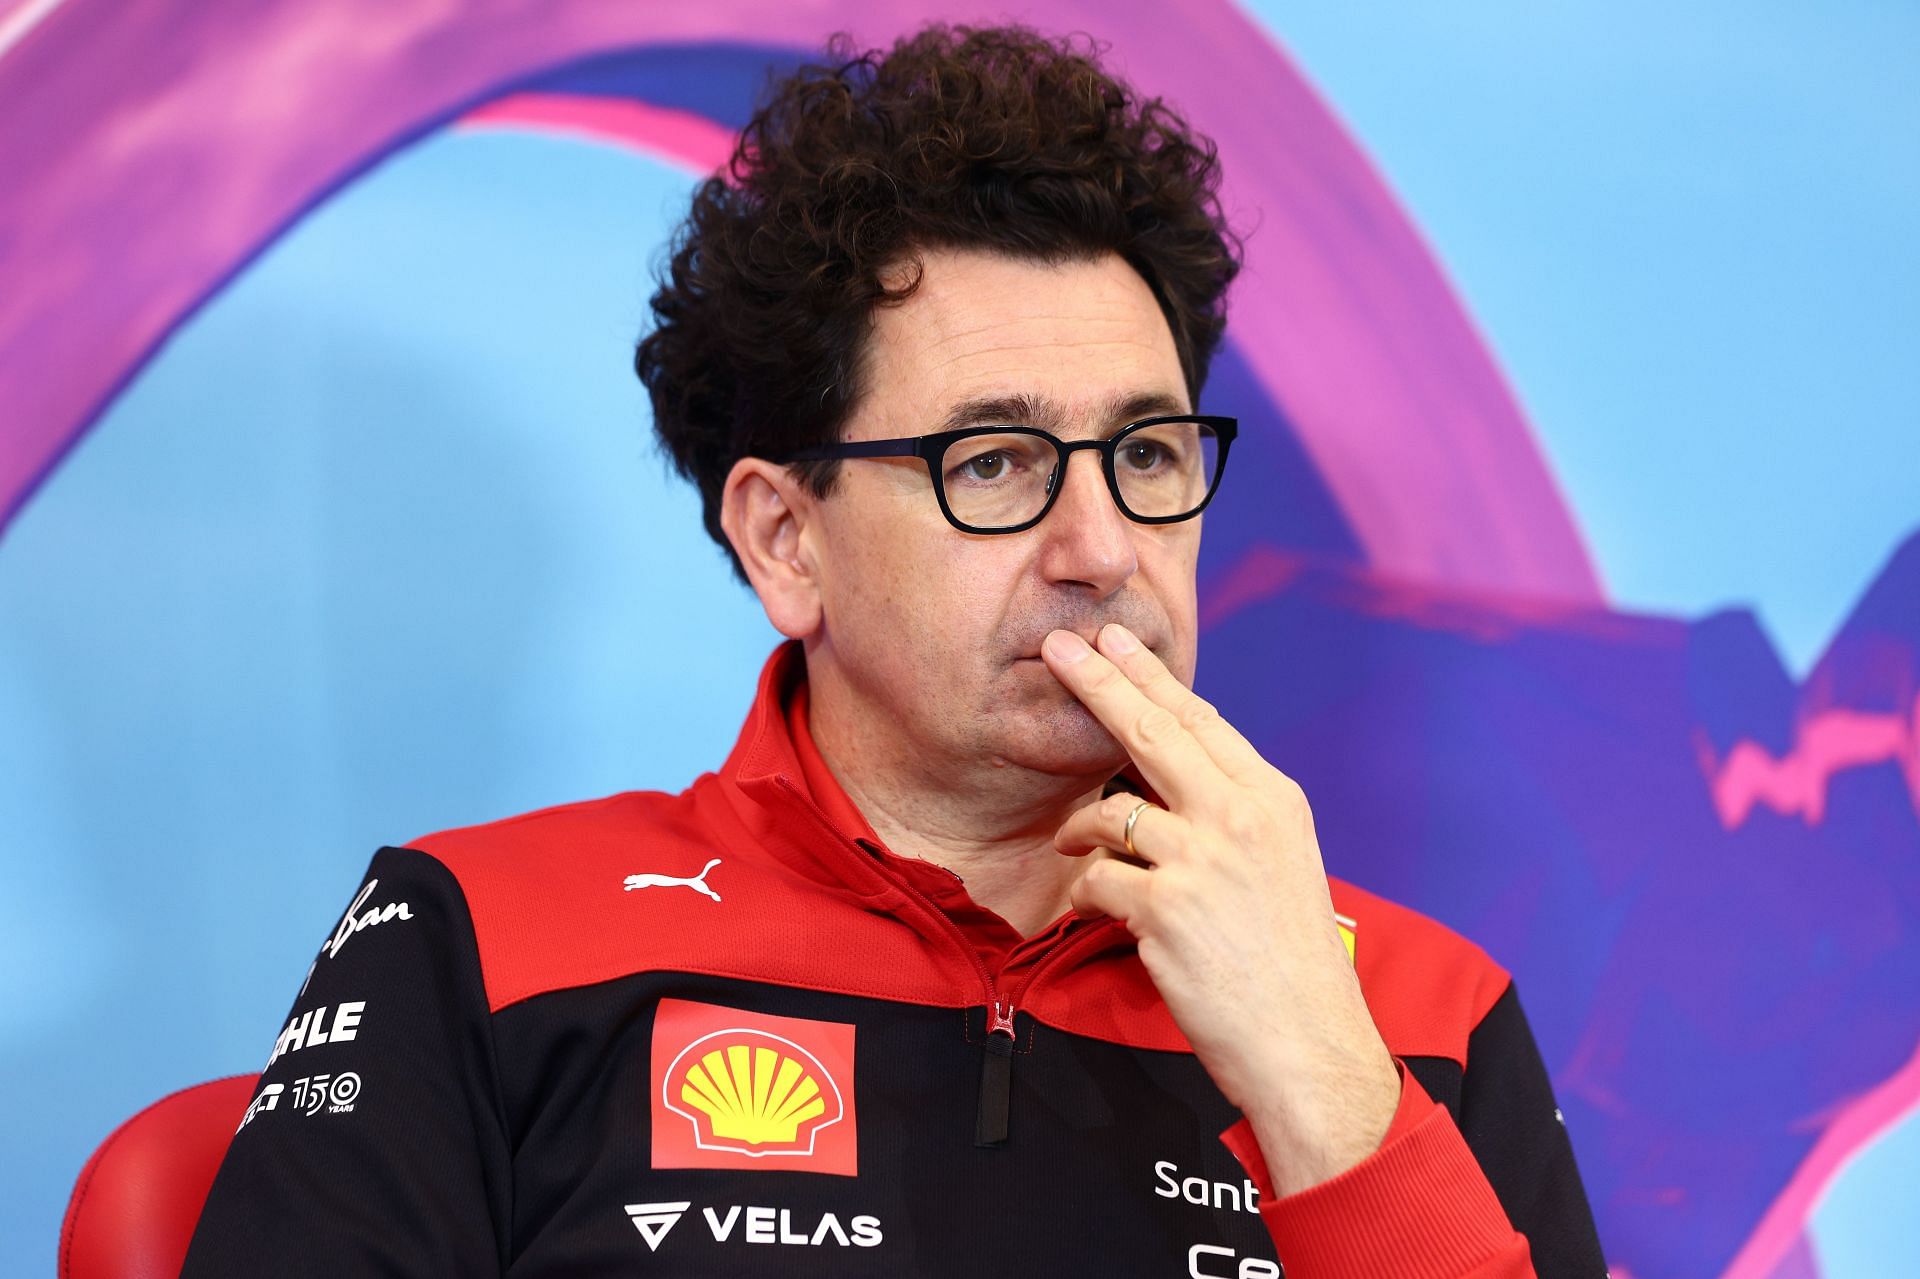 Ferrari team principal Mattia Binotto speaks to the media during the 2022 F1 Austrian GP weekend. (Photo by Clive Rose/Getty Images)